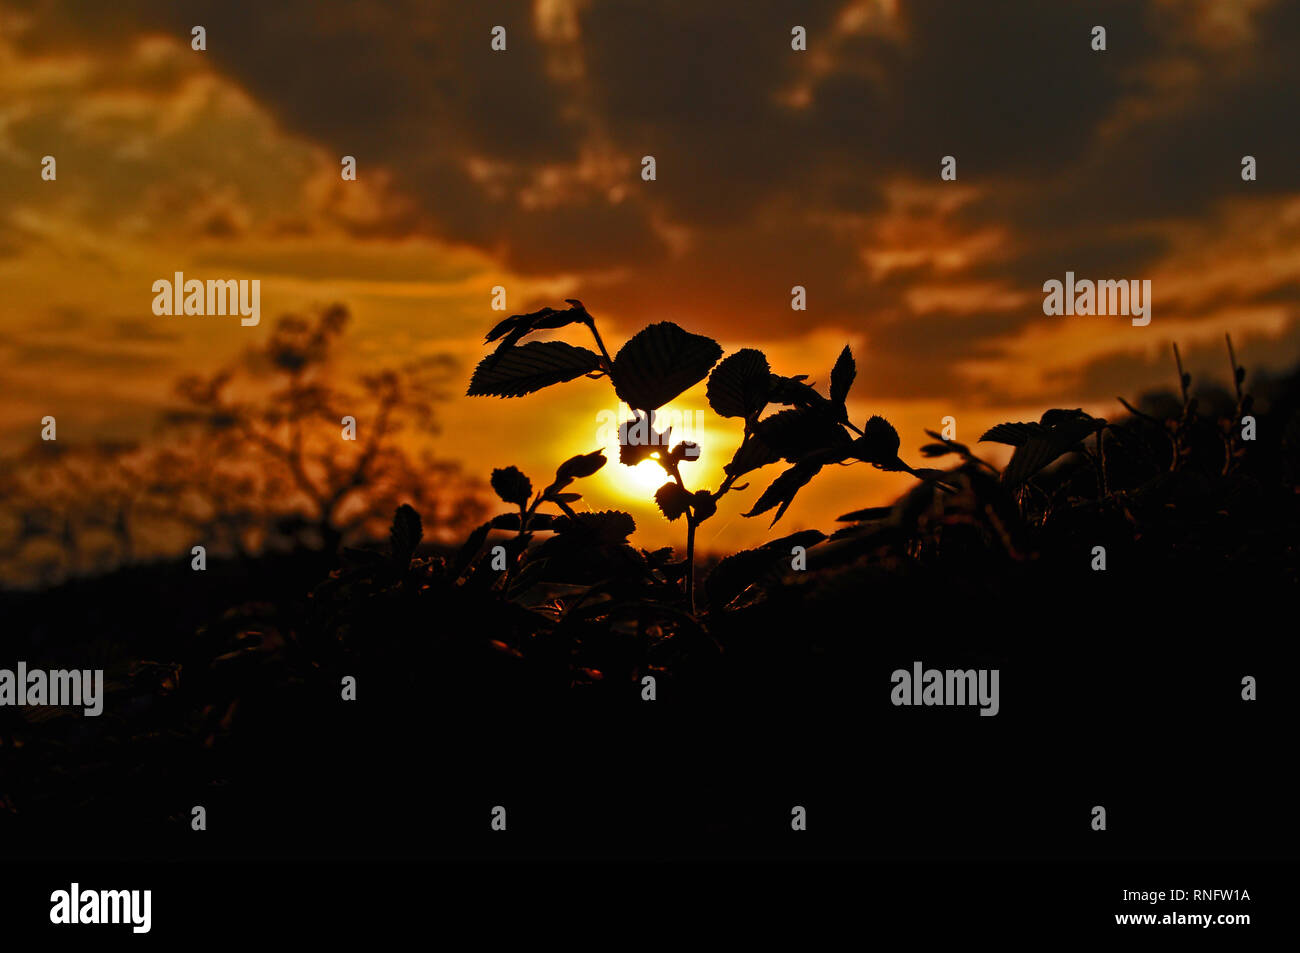 Landscape of a beautiful sunset with a silhouette of the nature in background in Safari Stock Photo